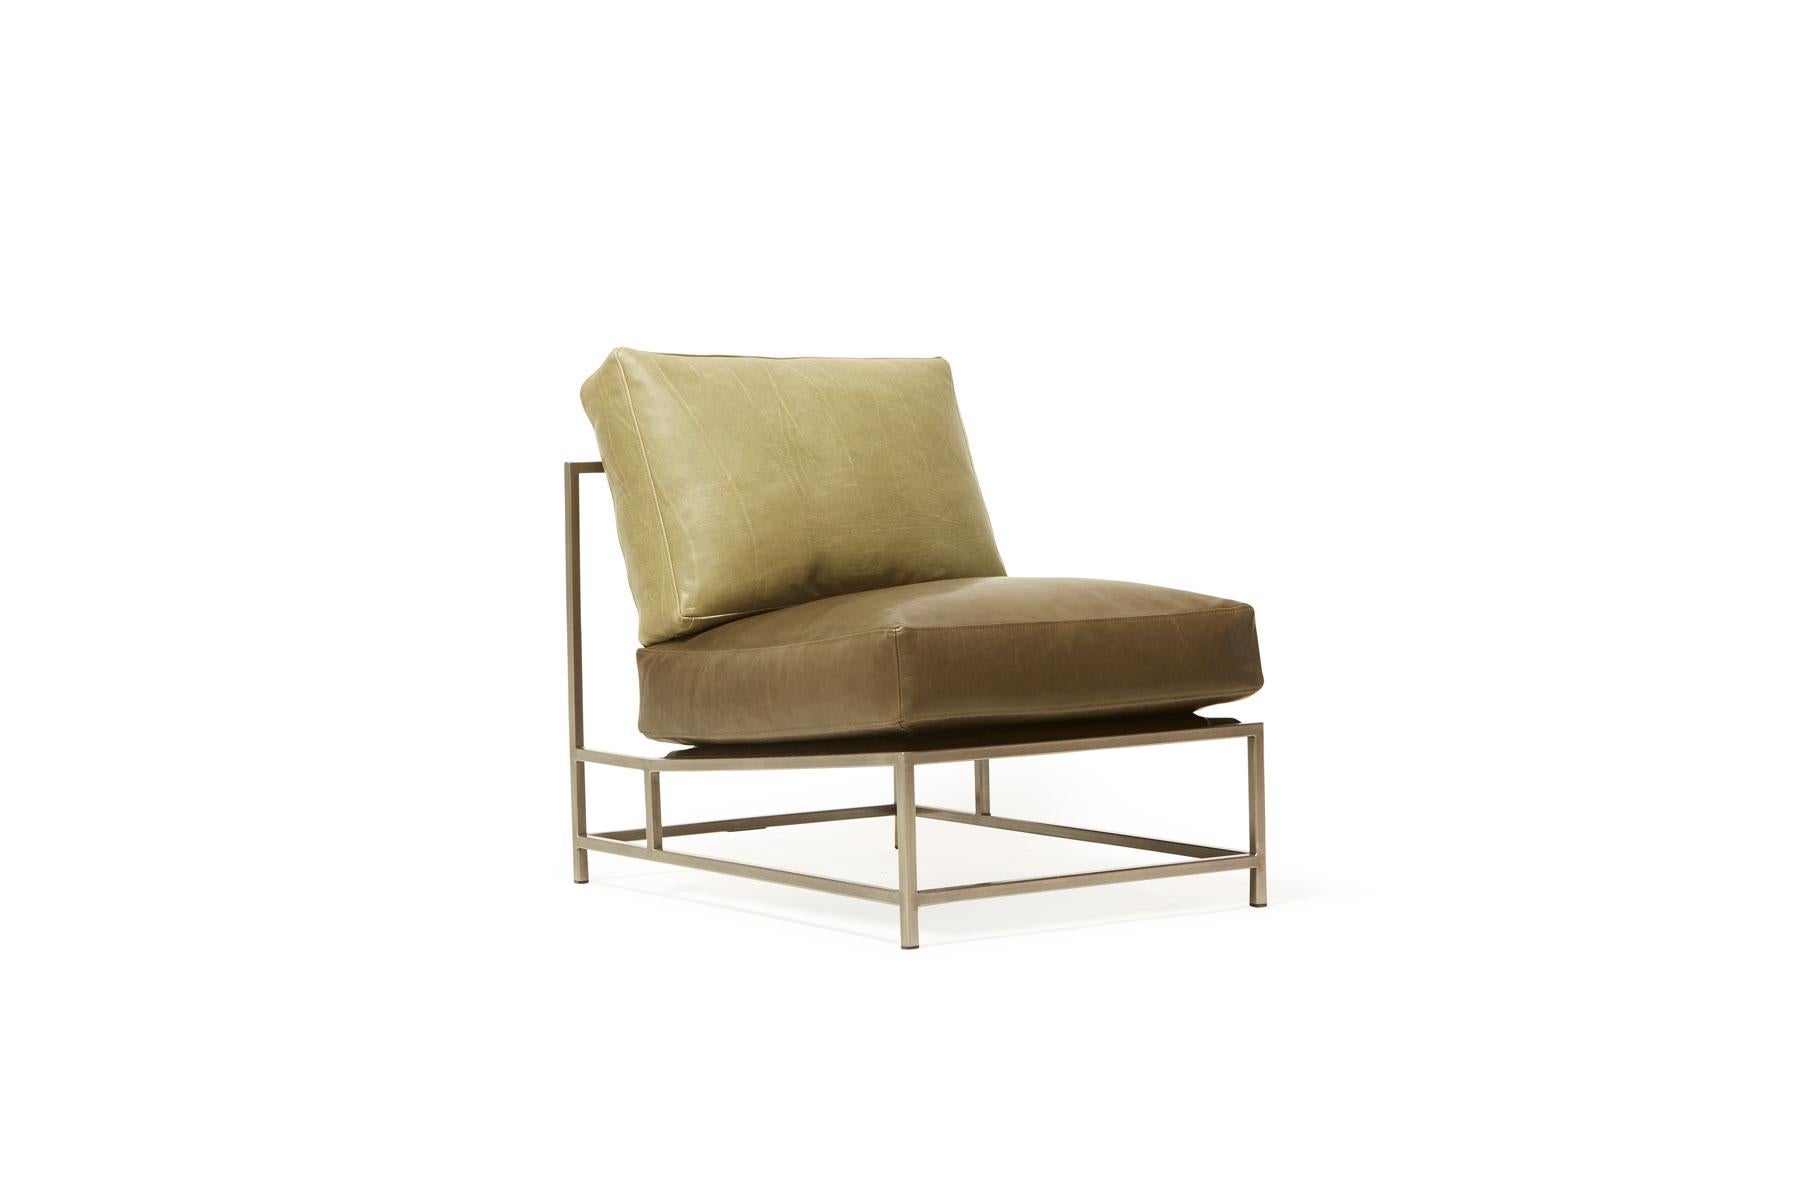 Sleek and refined, the Inheritance chair is a great addition to nearly any space. 

This variation is upholstered in two-tone green leather. The foam seat cushions have been wrapped in down, allowing for a soft and comfortable lounge experience.